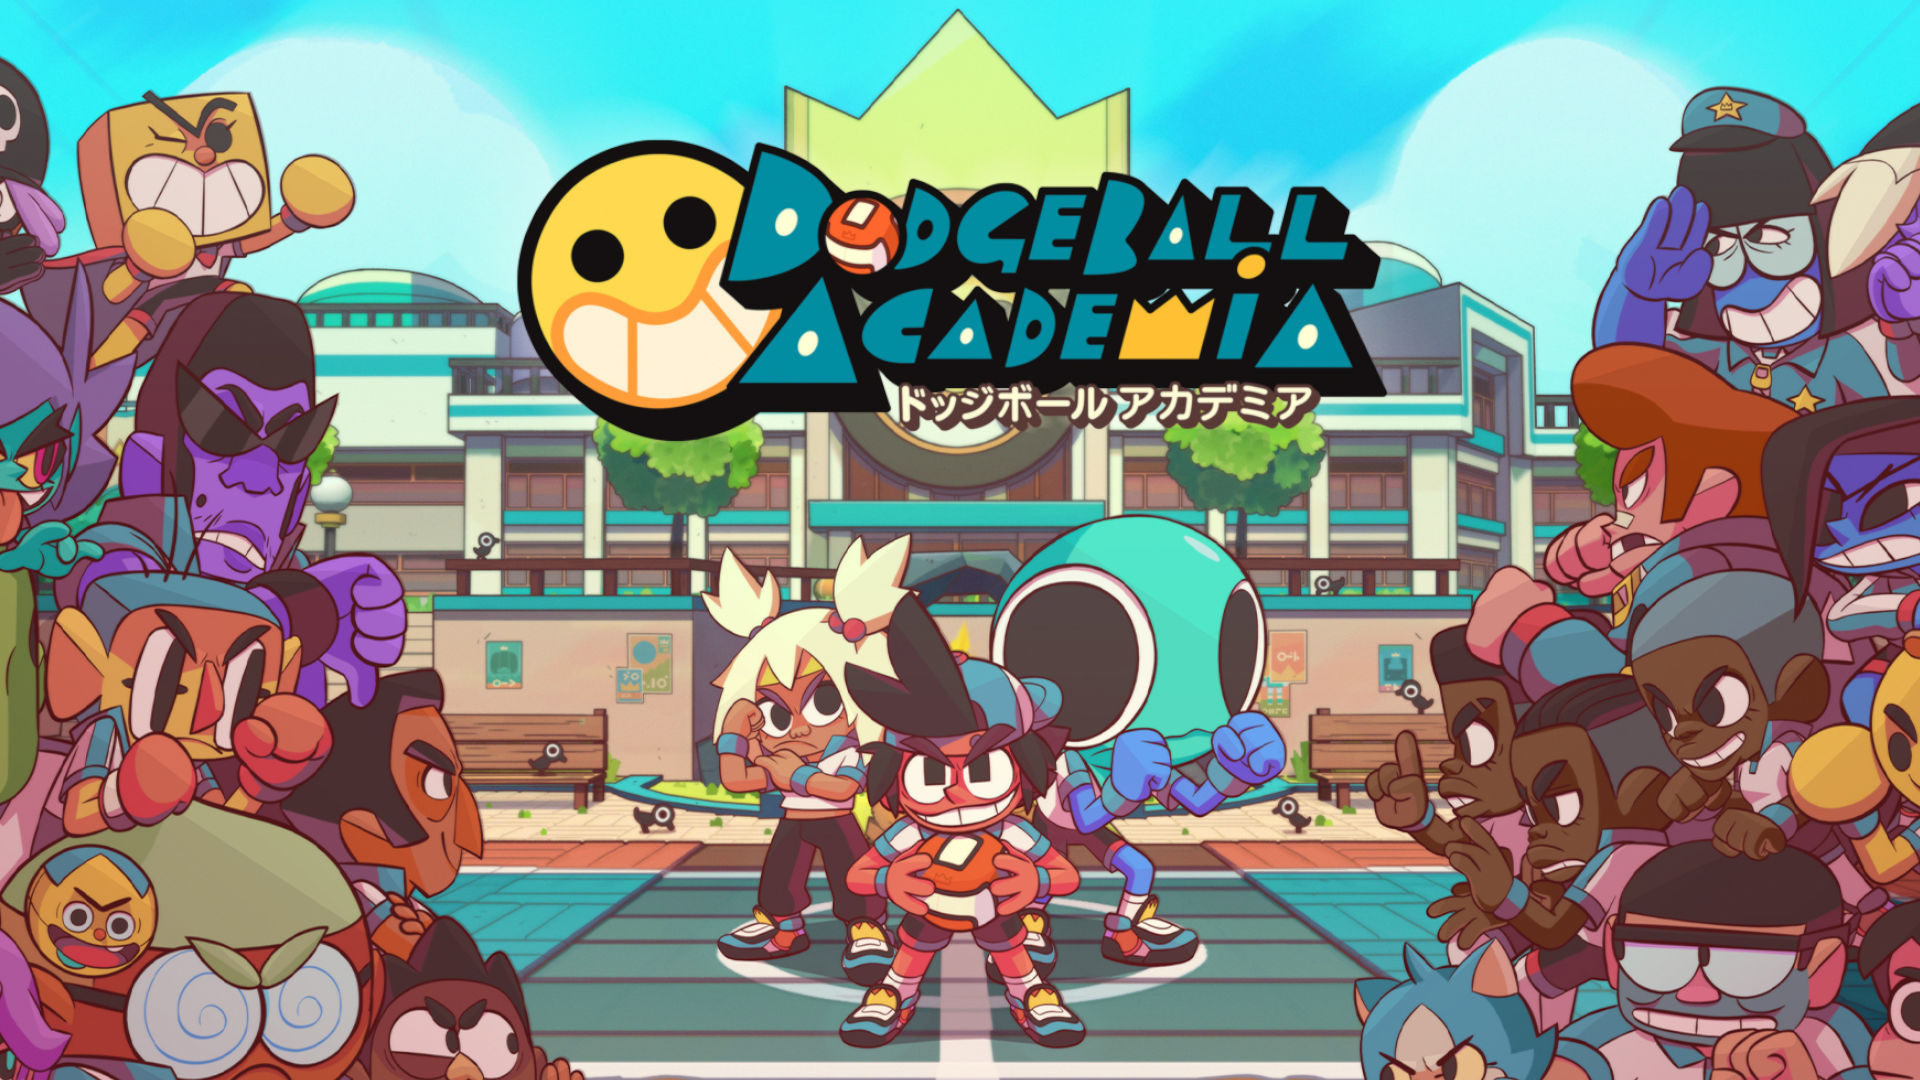 Cover art for Dodgeball Academia, one of the RPG dodgeball games on Switch